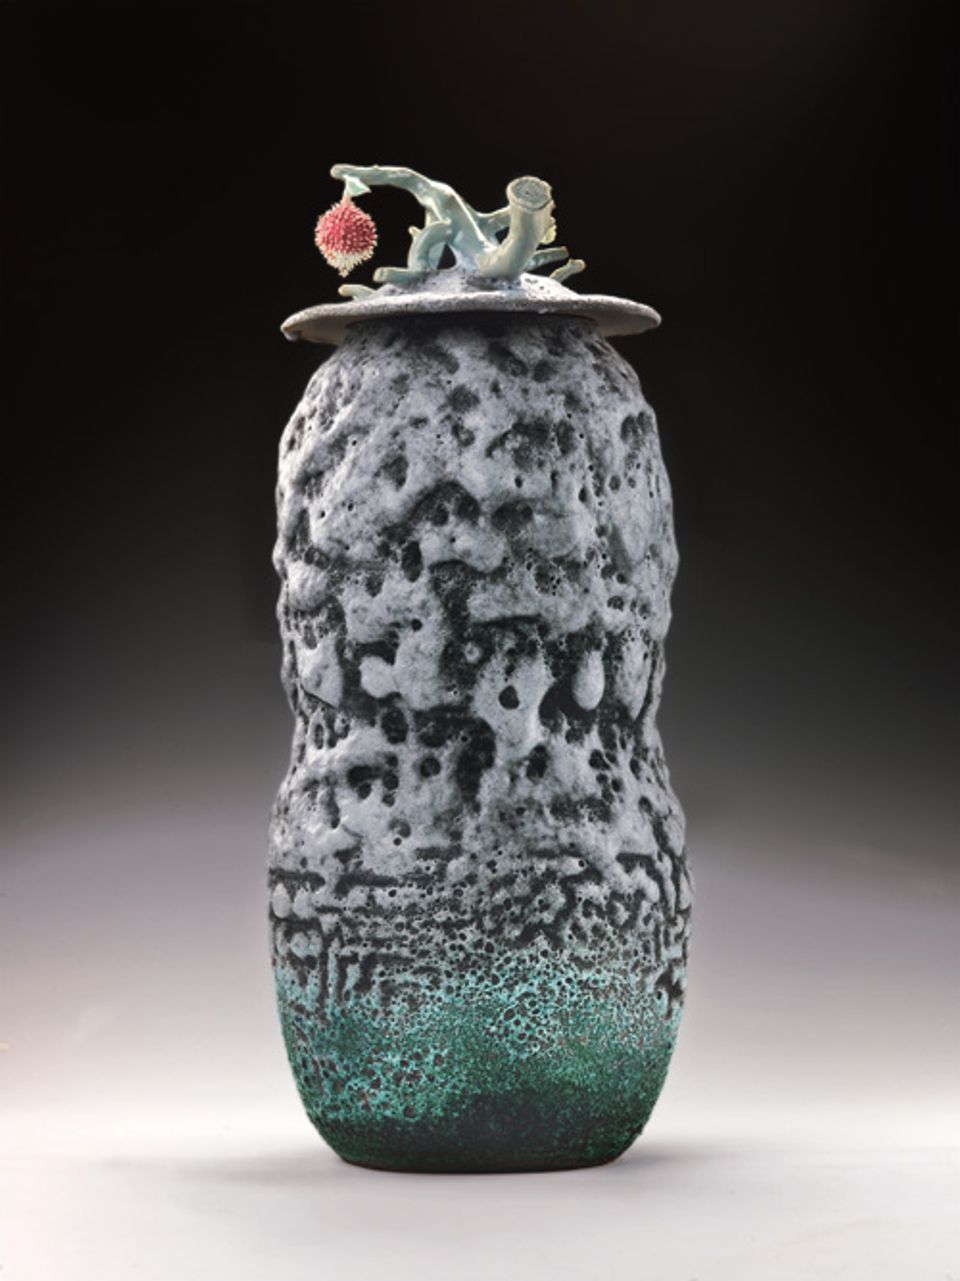 Lee's porcelain urn with a lychee fruit attached at the top.